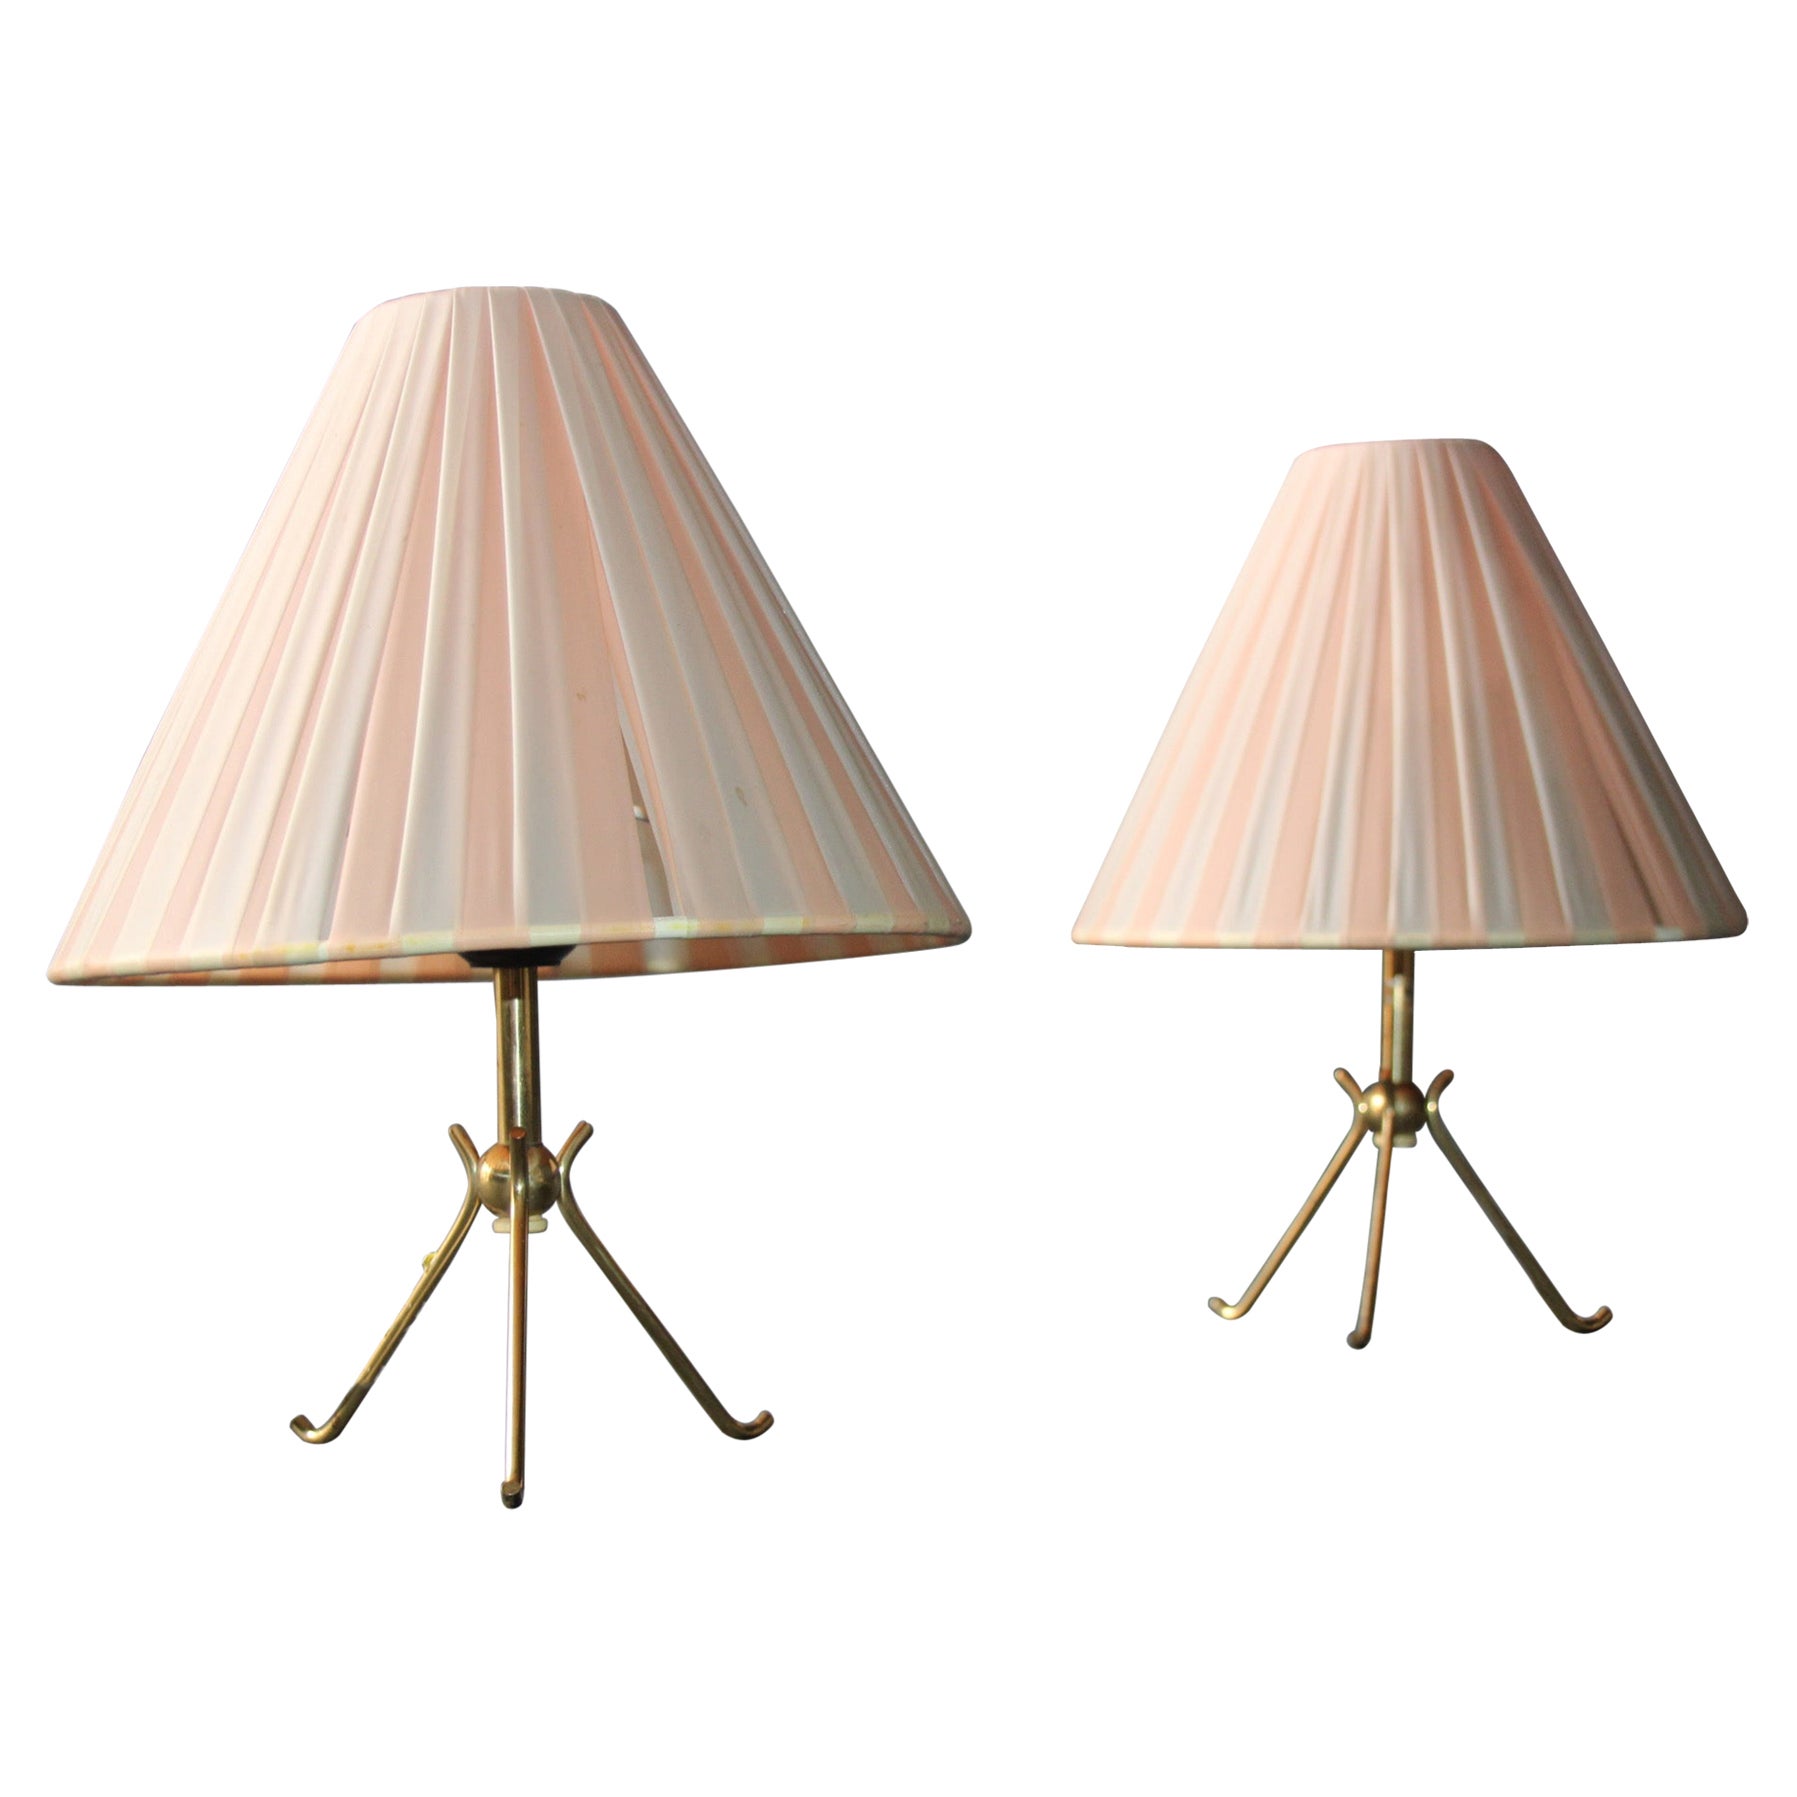 Brass Table Lamp For At 1stdibs, 1stdibs Brass Table Lamps